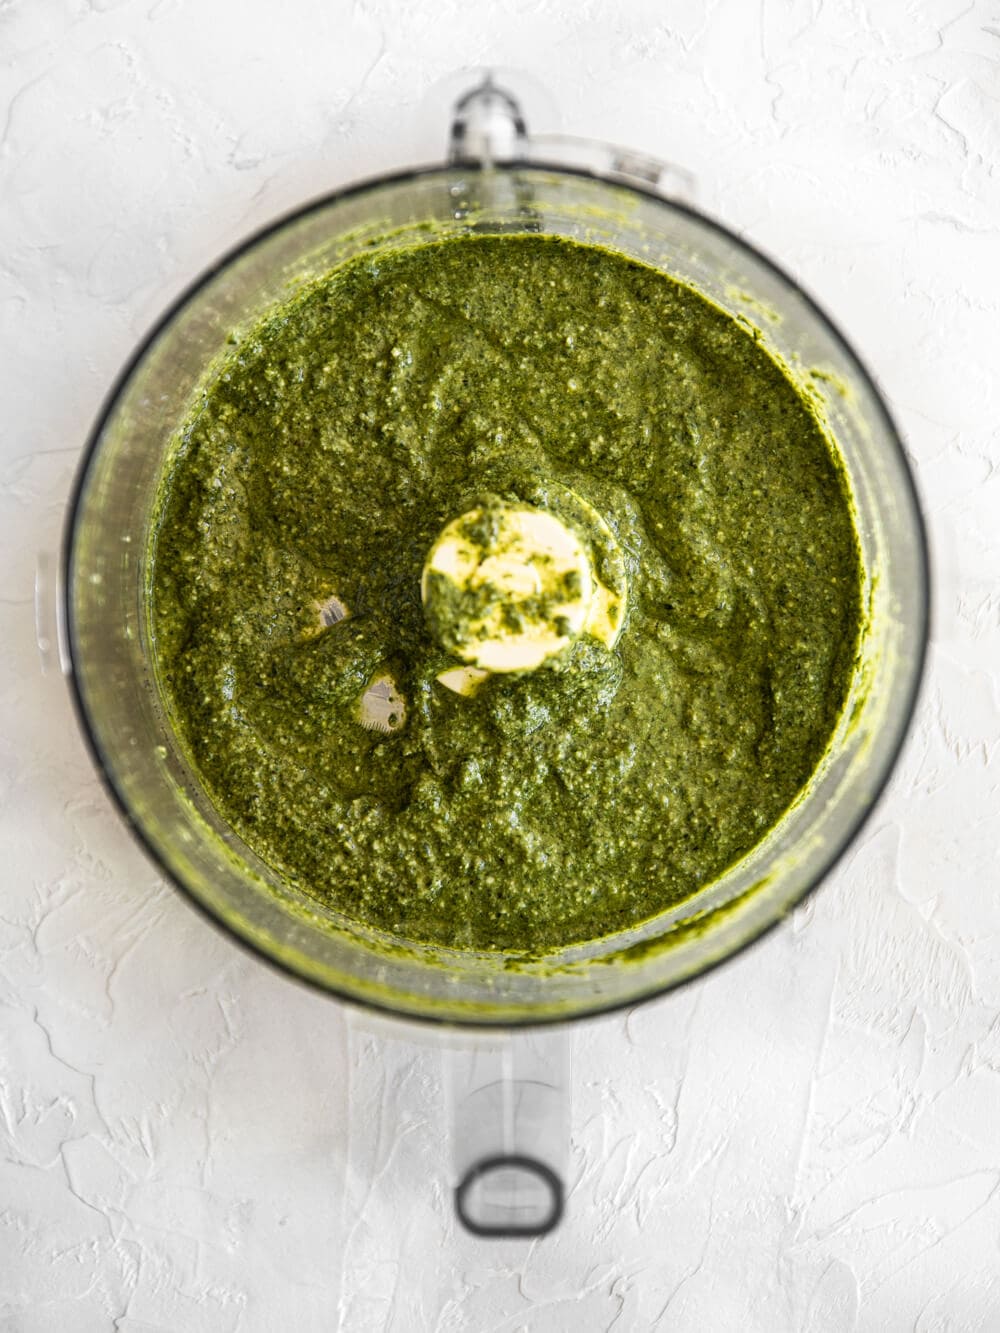 Food processor filled with basil pesto.